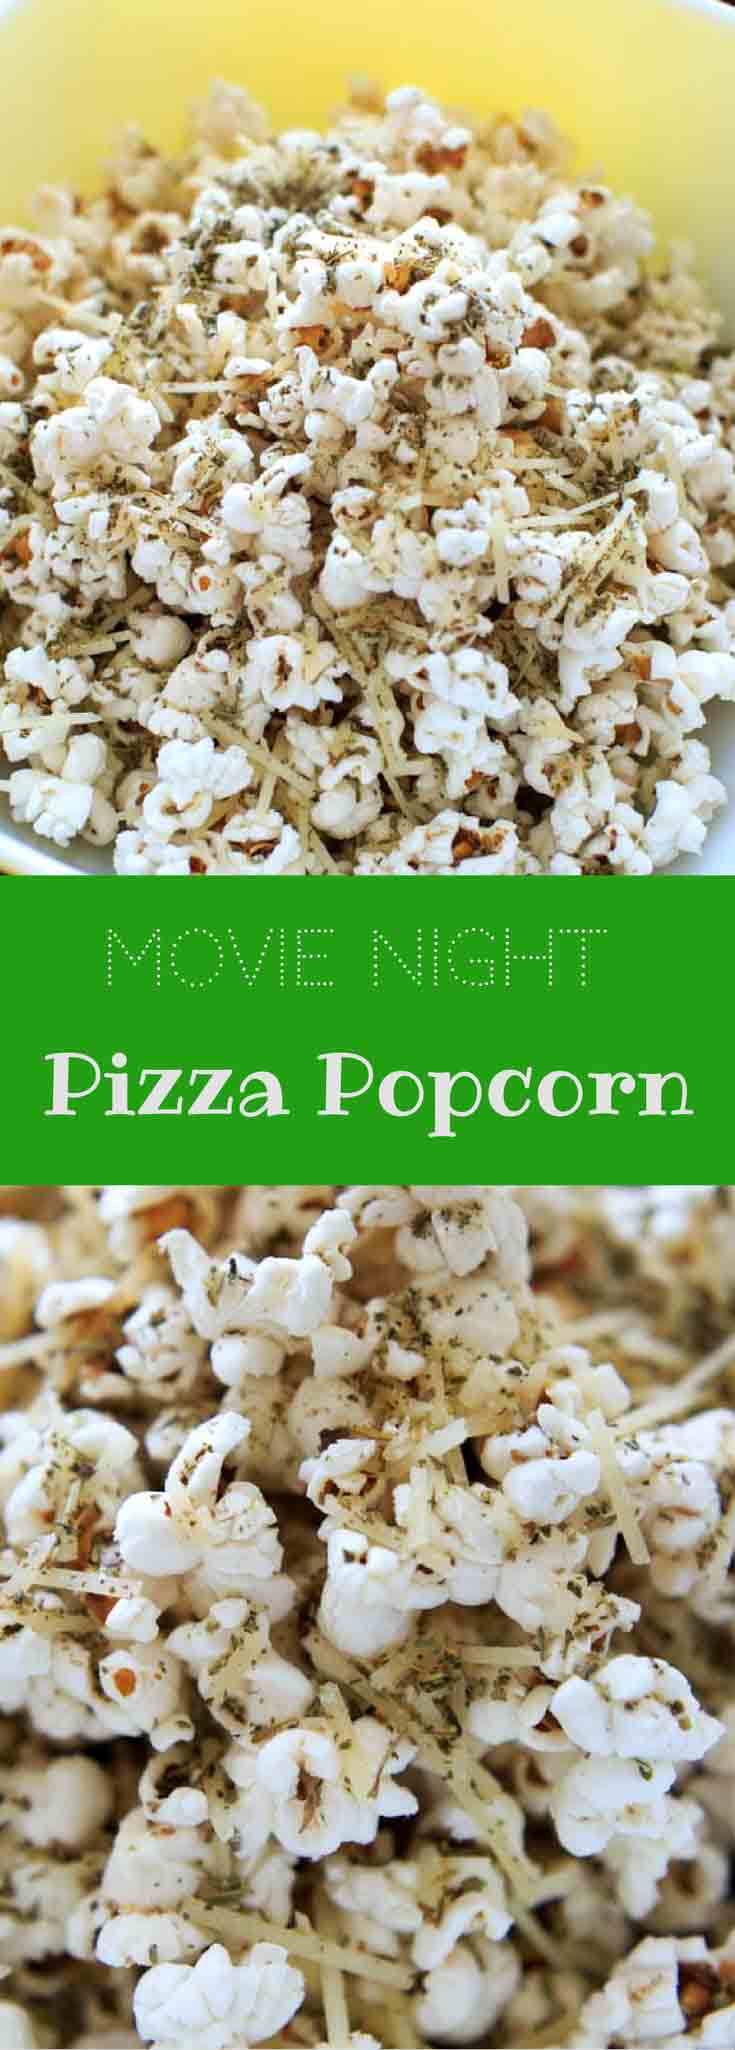 Movie Night Pizza Popcorn - herbs and cheese make a flavorful snack